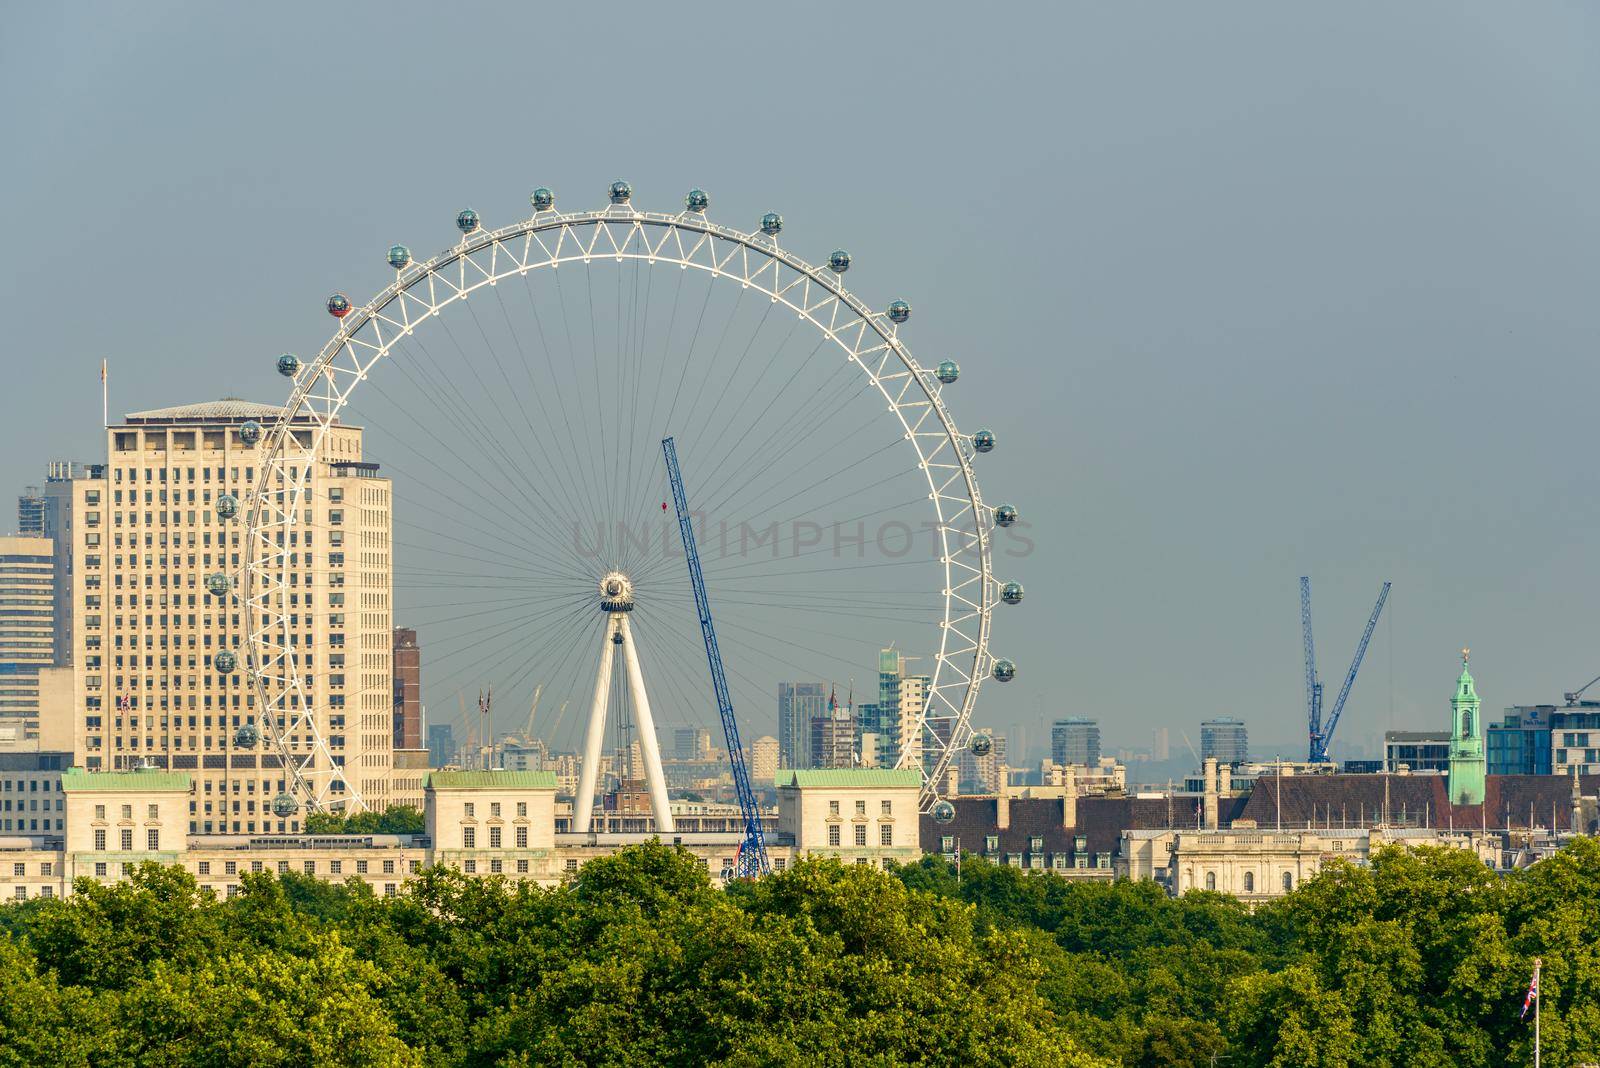 LONDON, UK - CIRCA SEPTEMBER 2013: The London Eye with Green Park in the foreground.